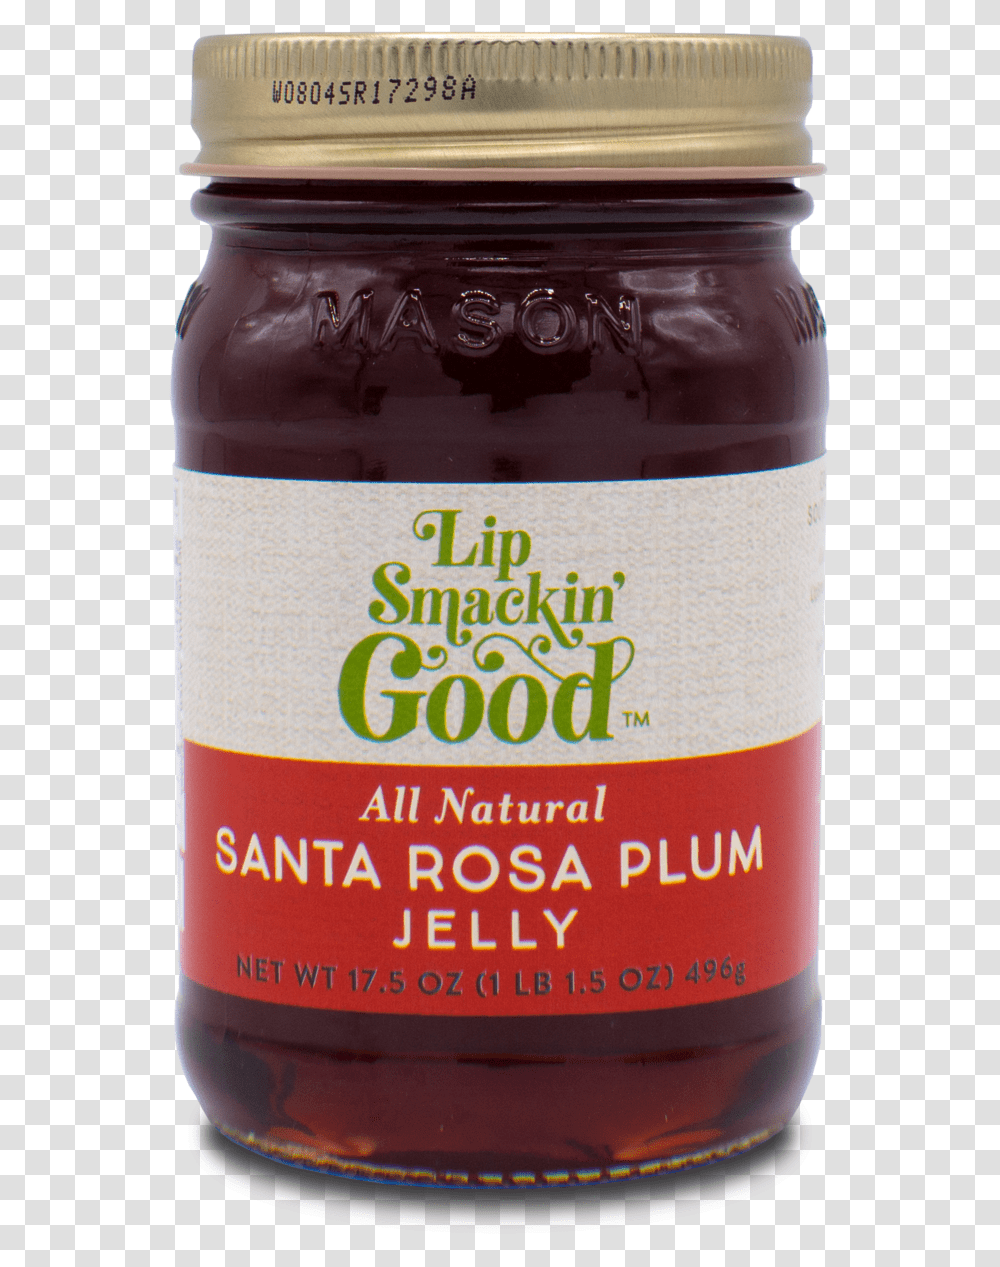 Santa Rosa Plum Jelly Chocolate Spread, Beverage, Alcohol, Beer, Bottle Transparent Png